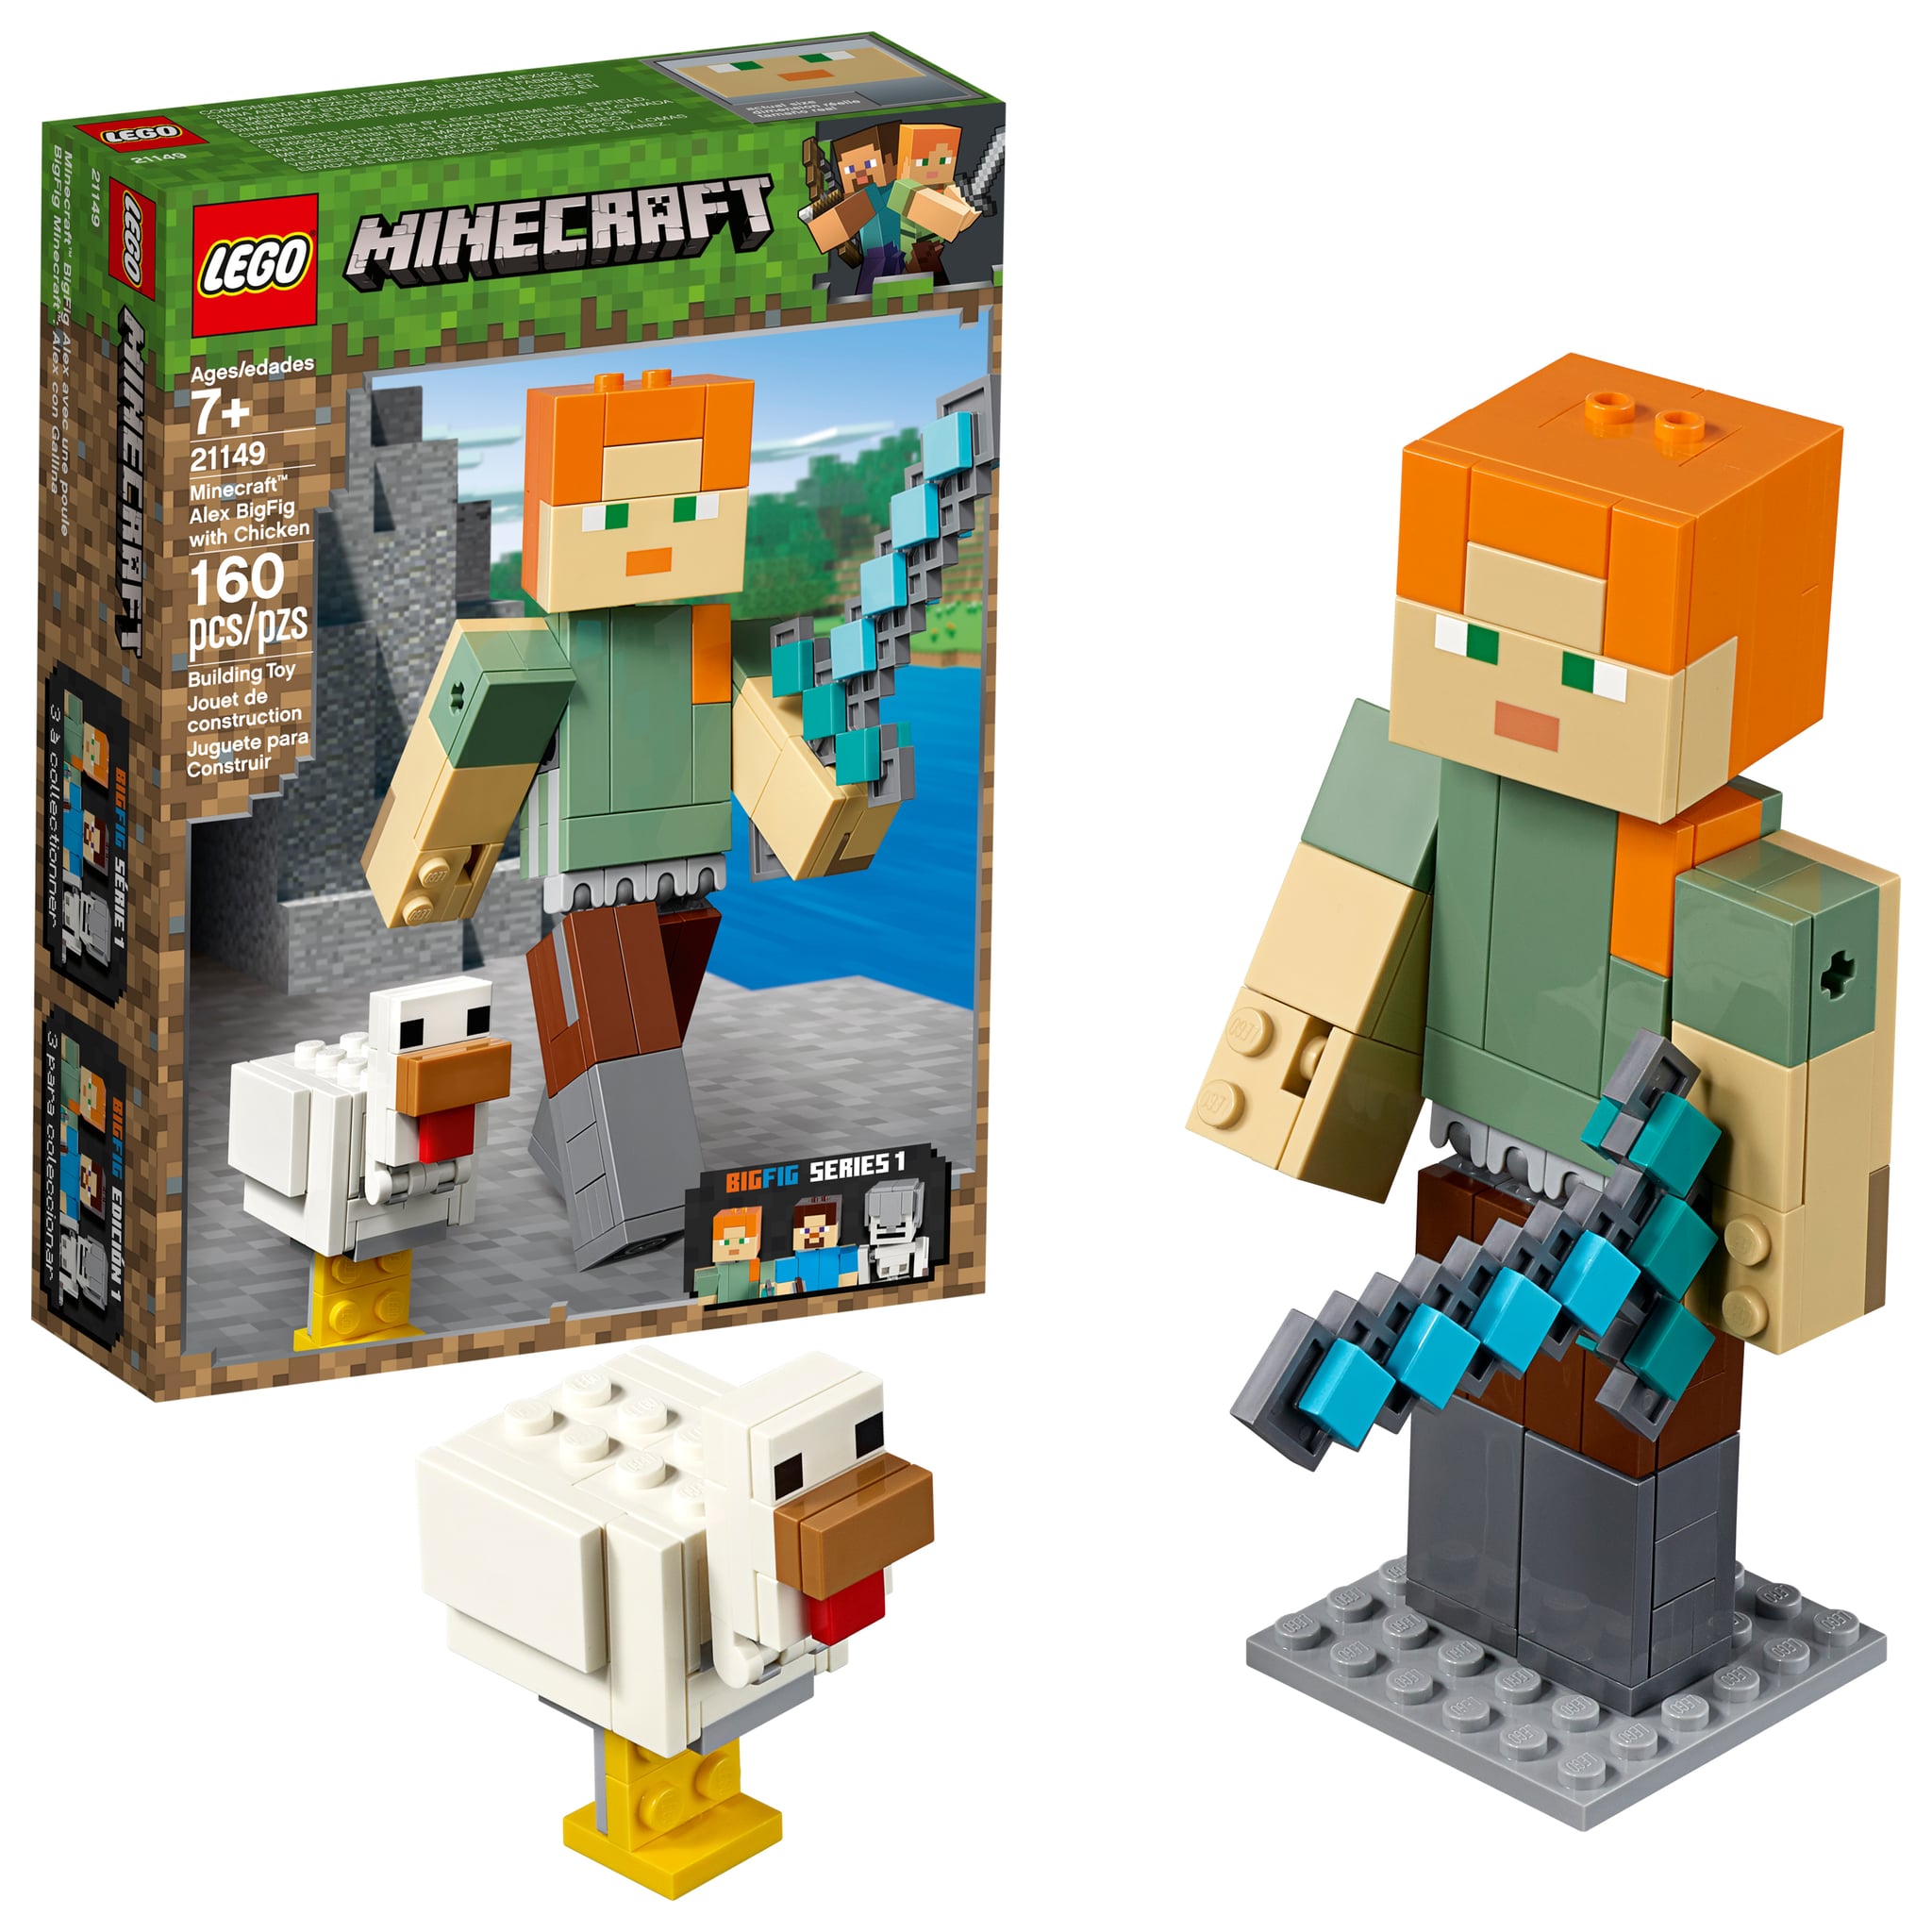 Lego Minecraft Alex Bigfig With Chicken Here Are 33 Of The Most